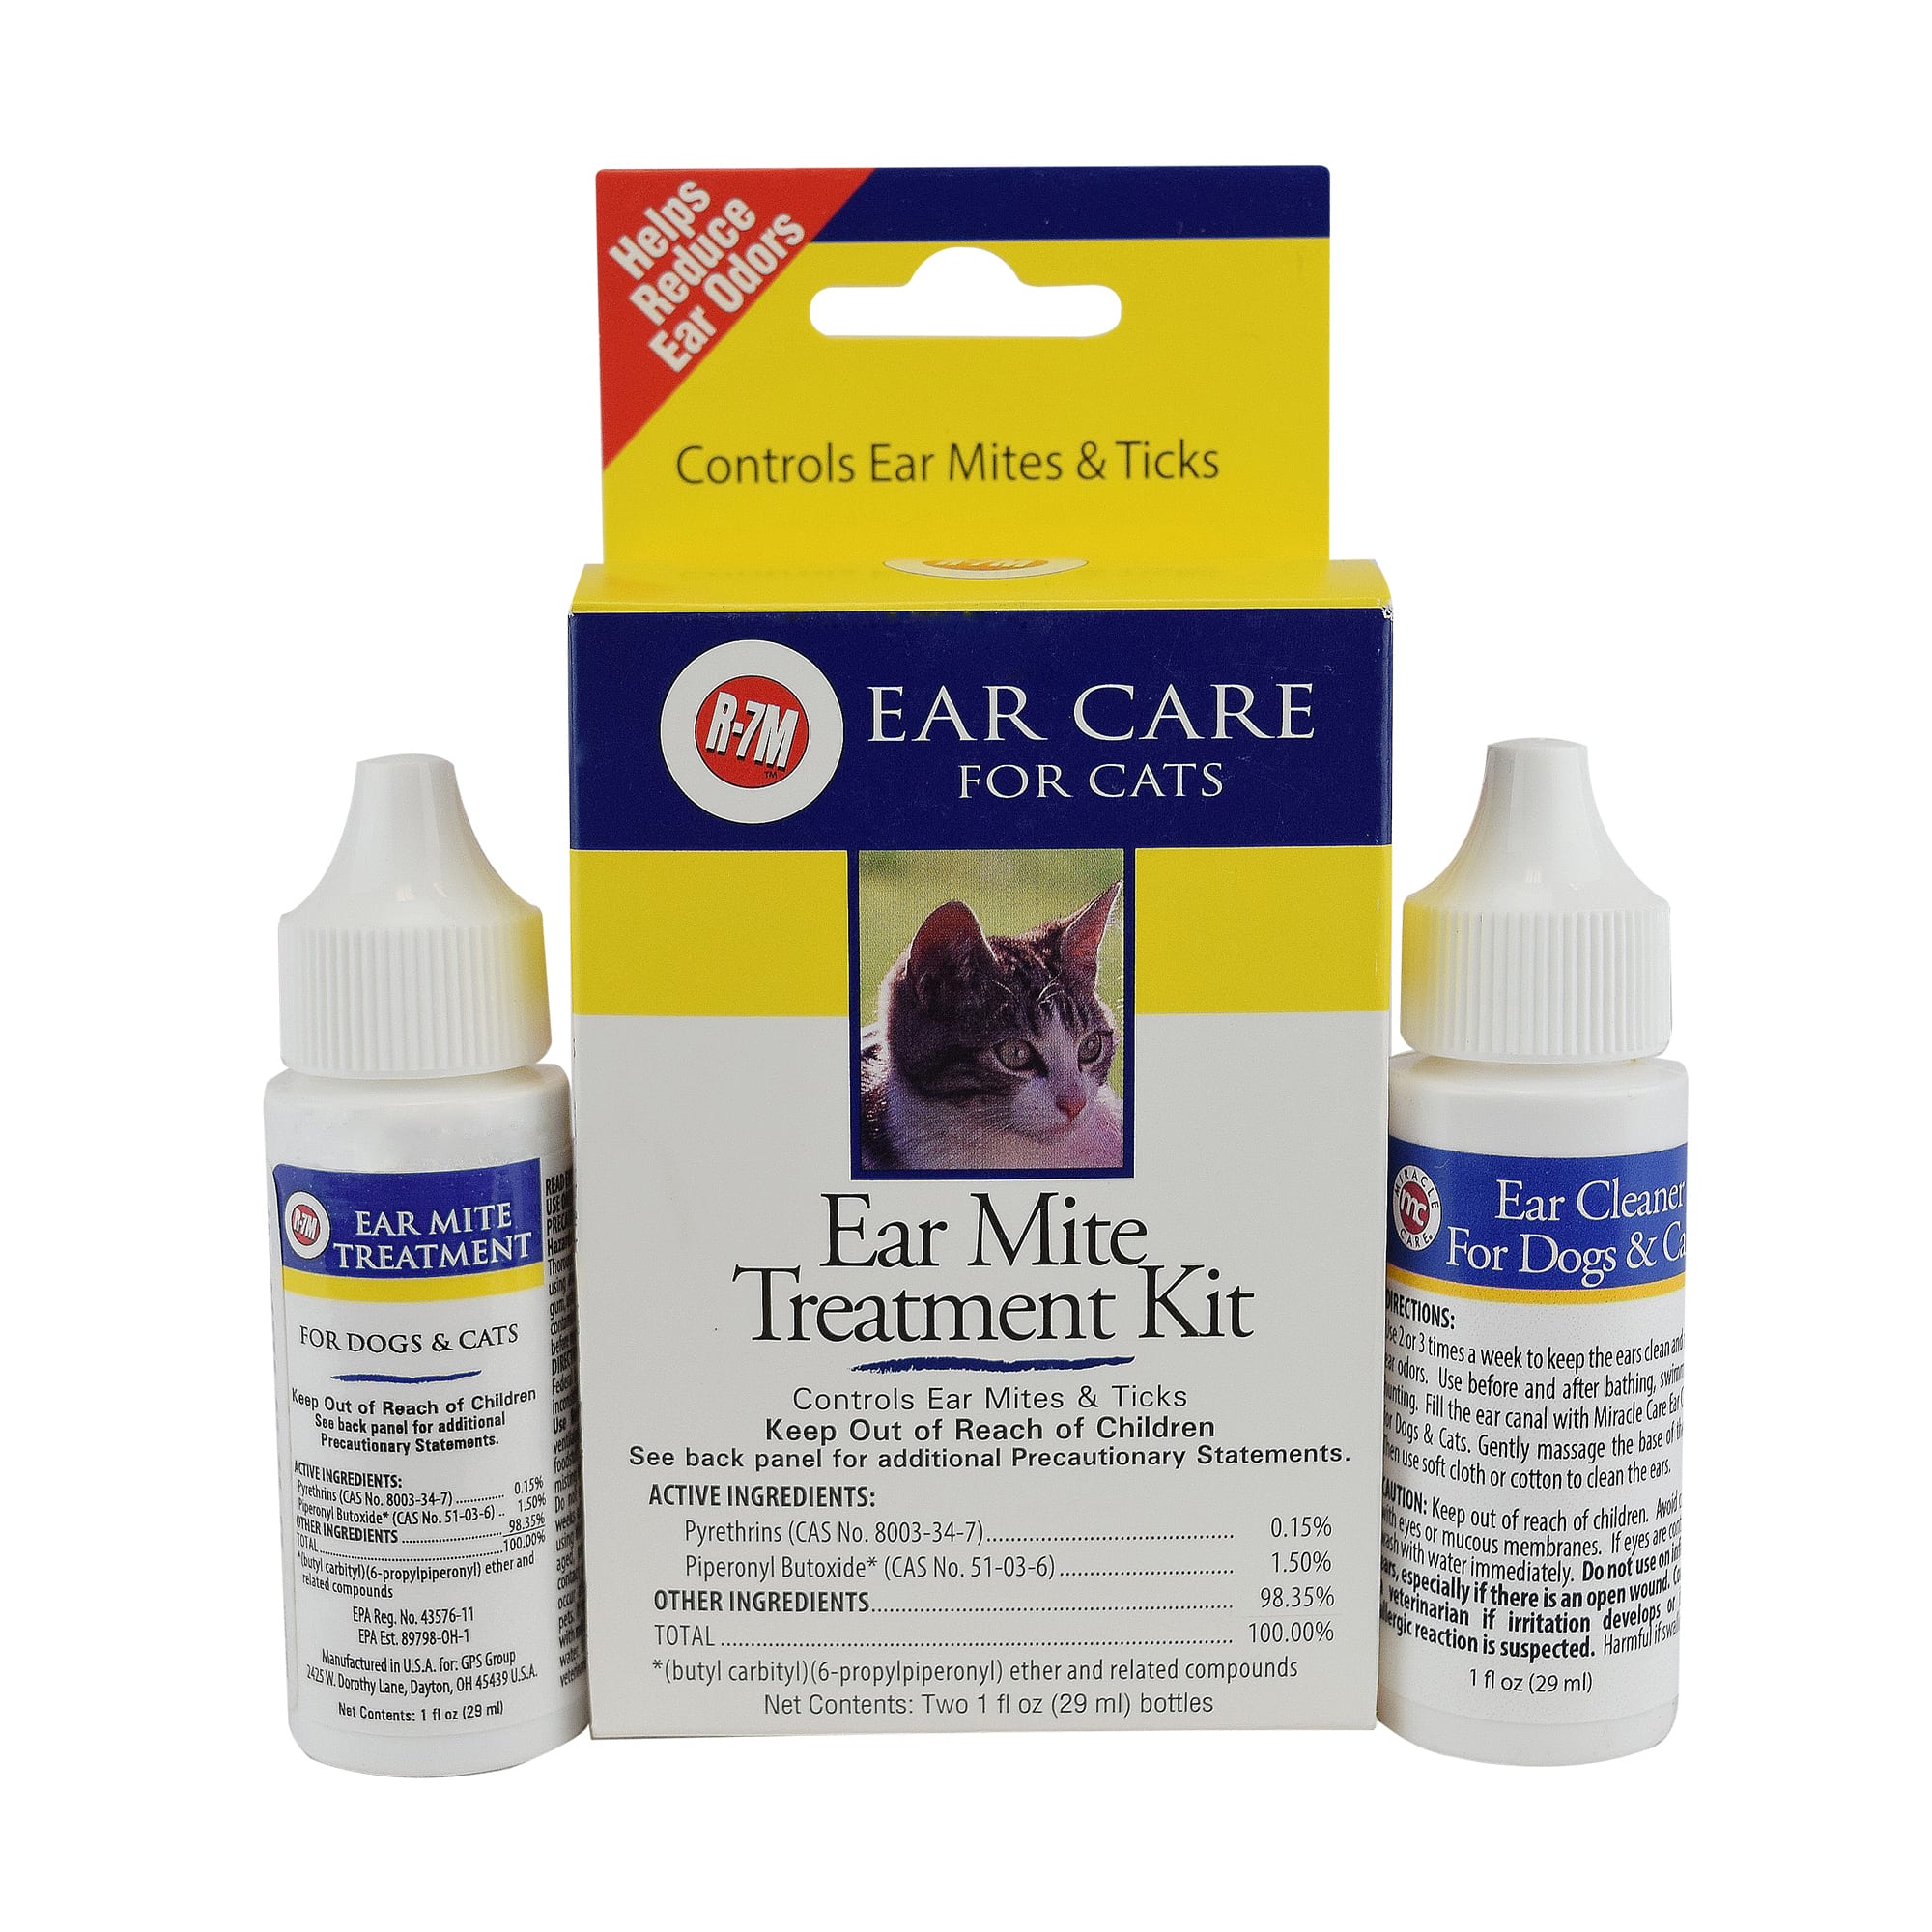 How To Get A Tick Off A Cats Ear